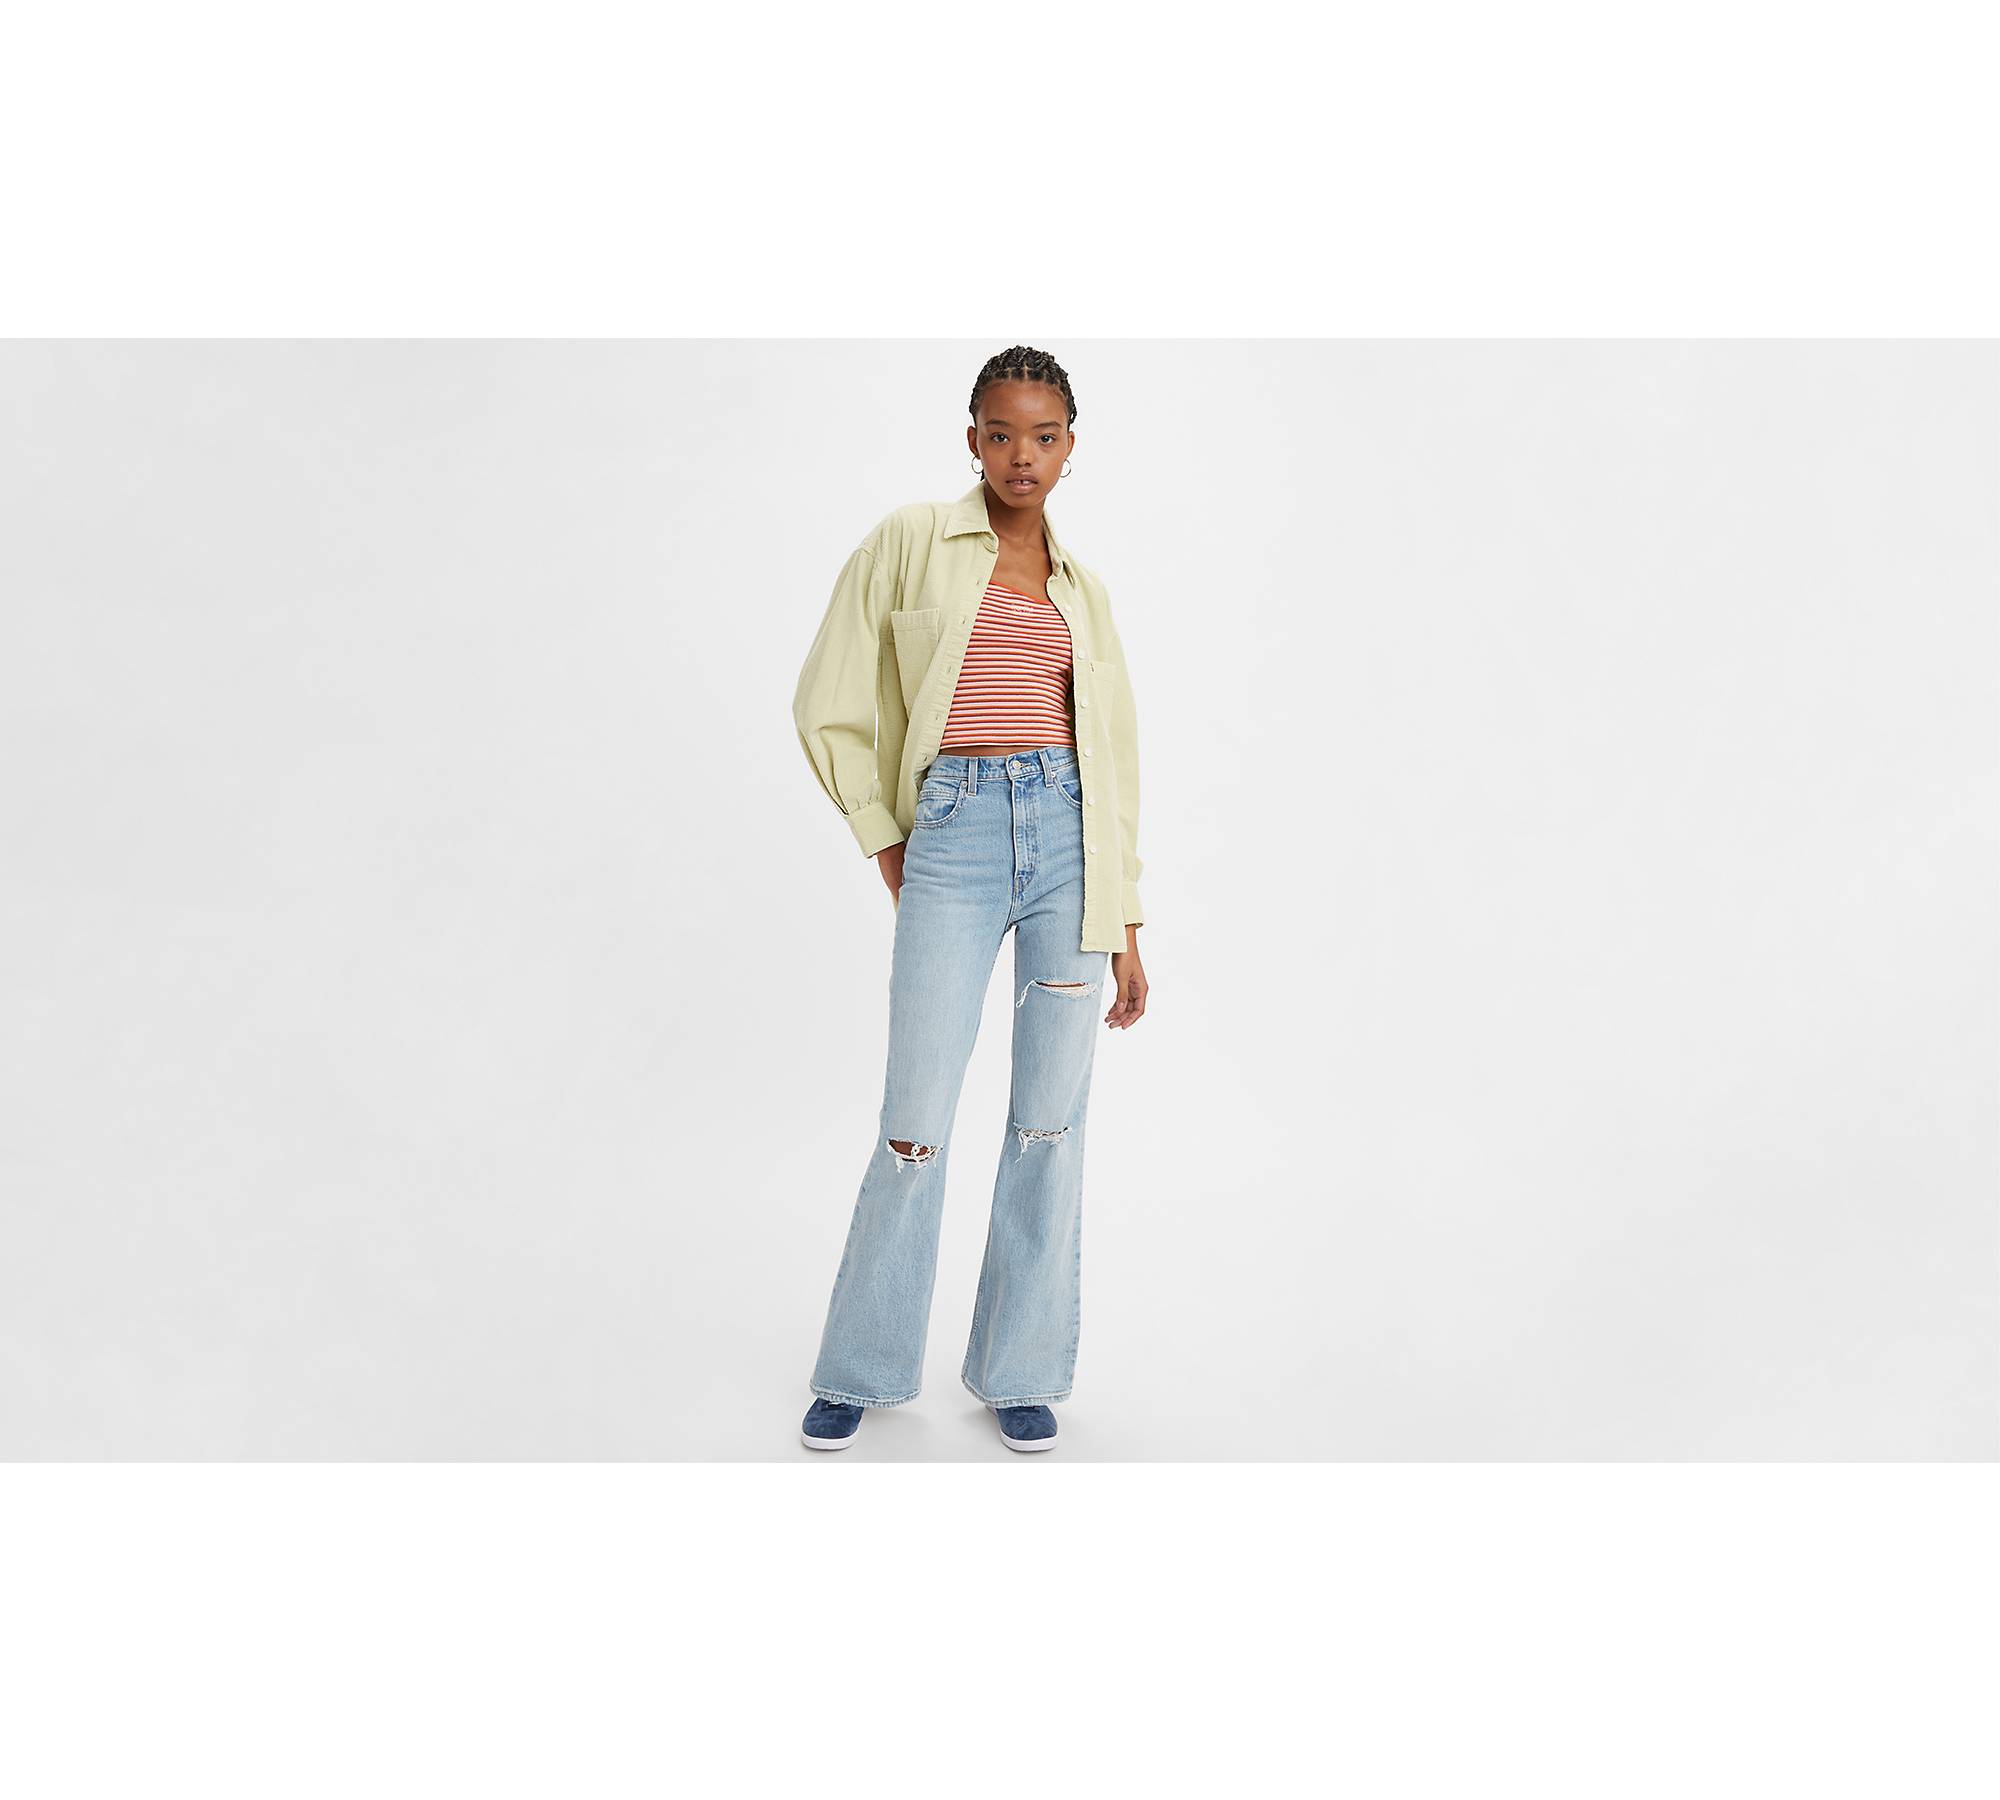 Genuine Sonoma Jean Company Women's Pants On Sale Up To 90% Off Retail